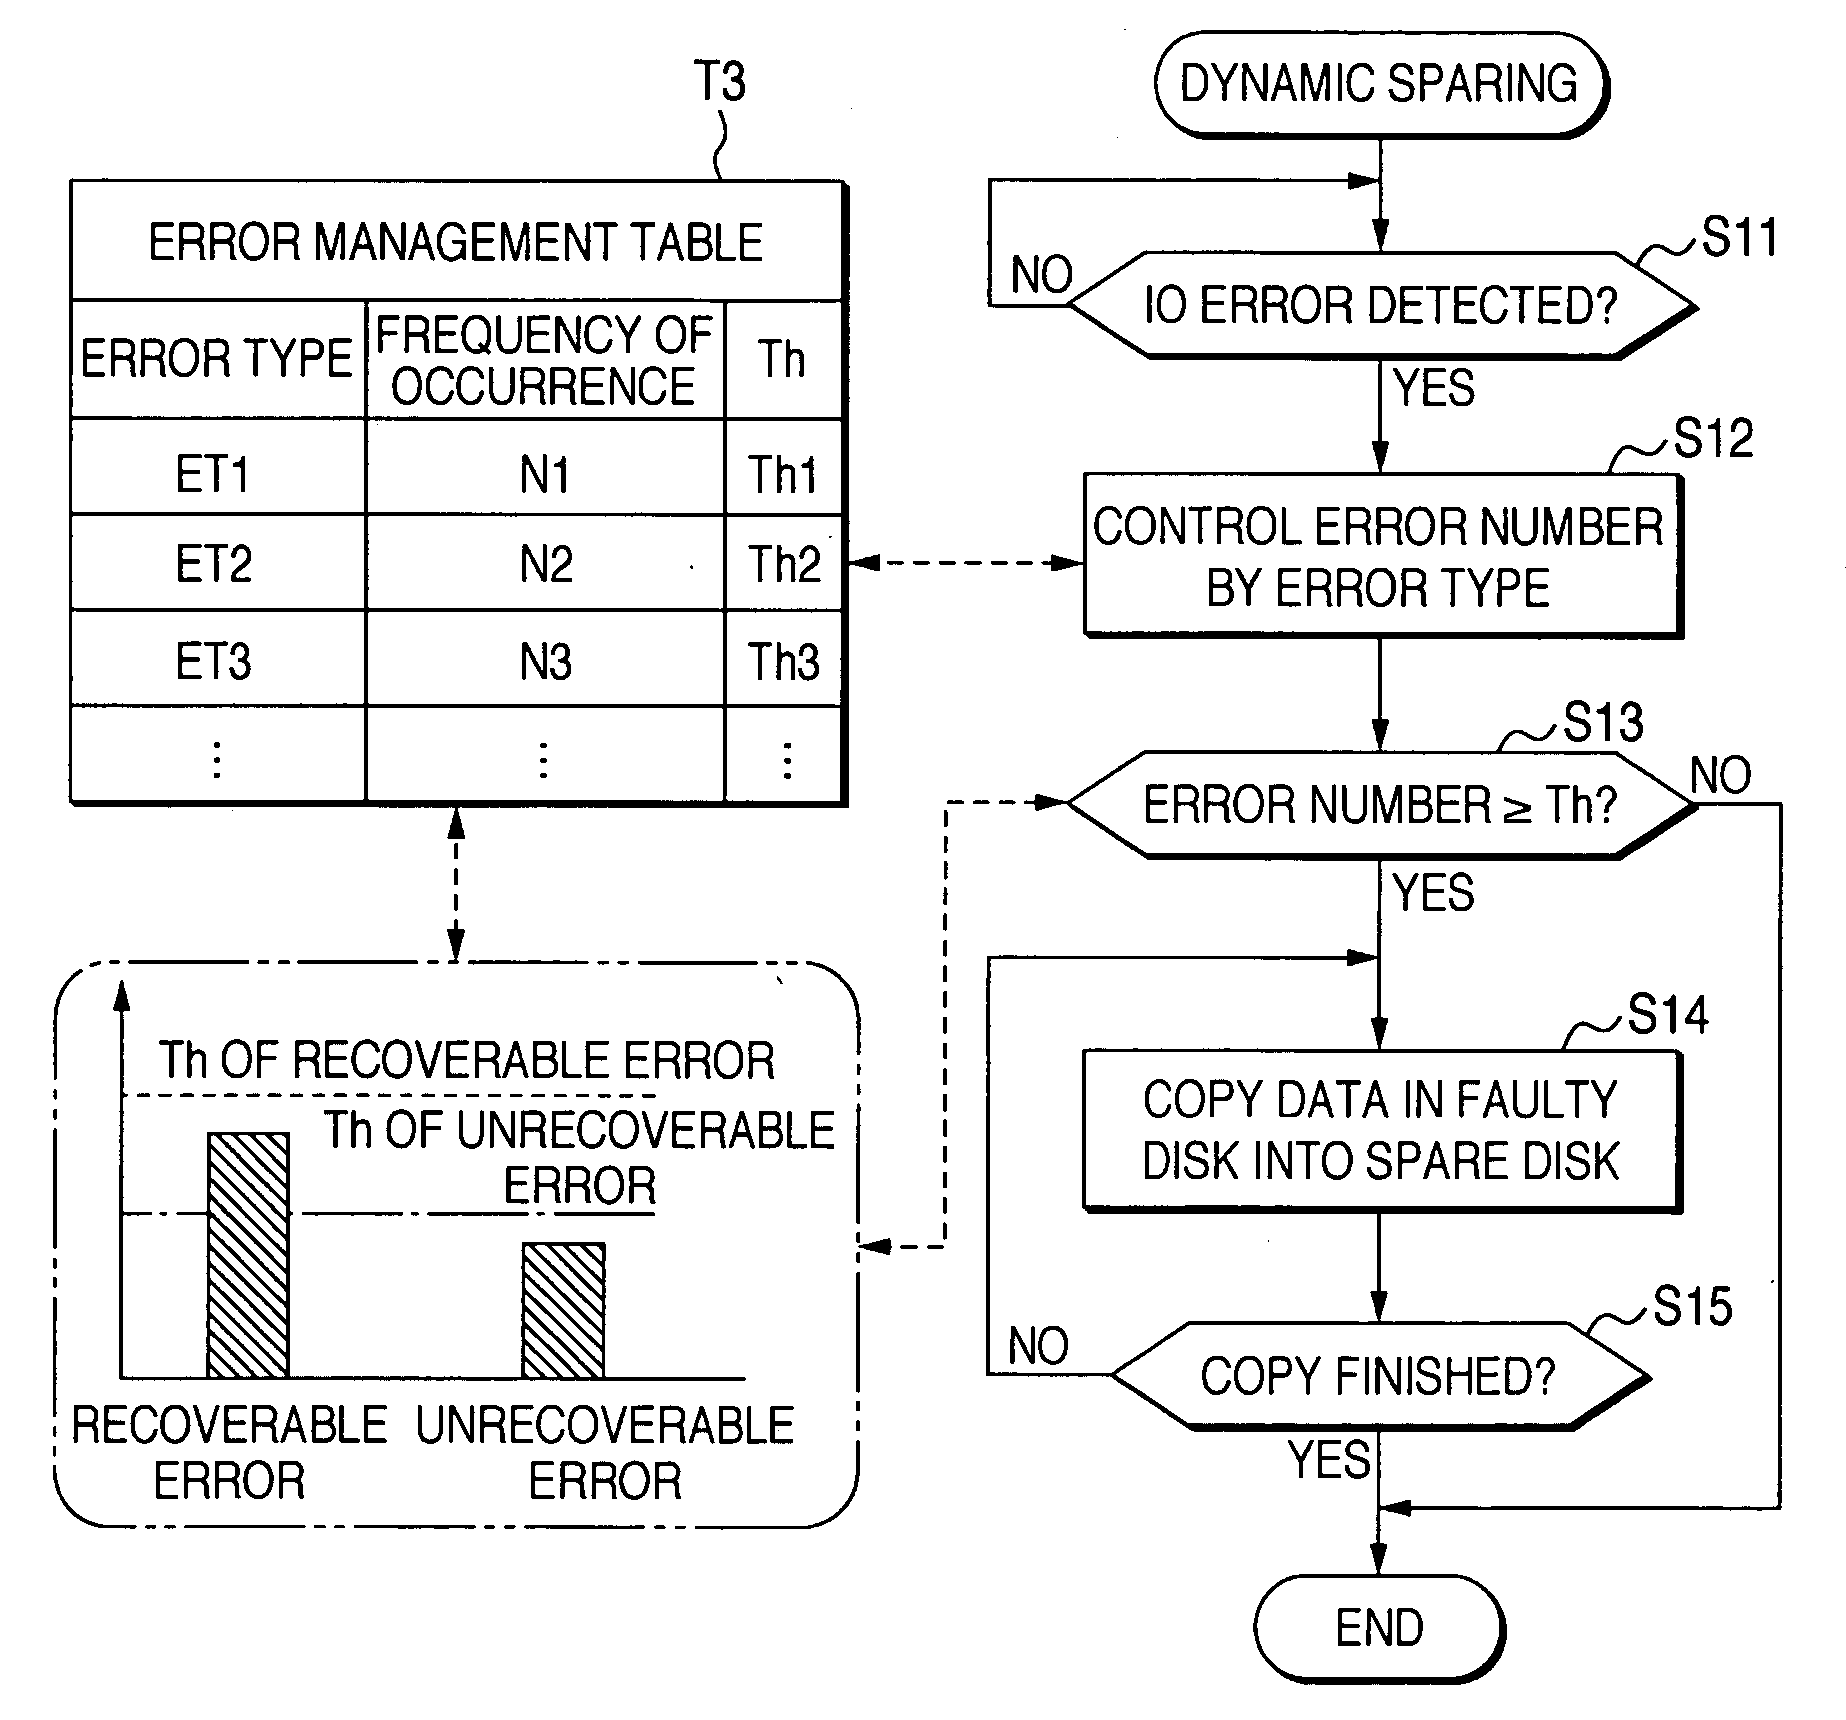 Disk array system and a method of avoiding failure of the disk array system